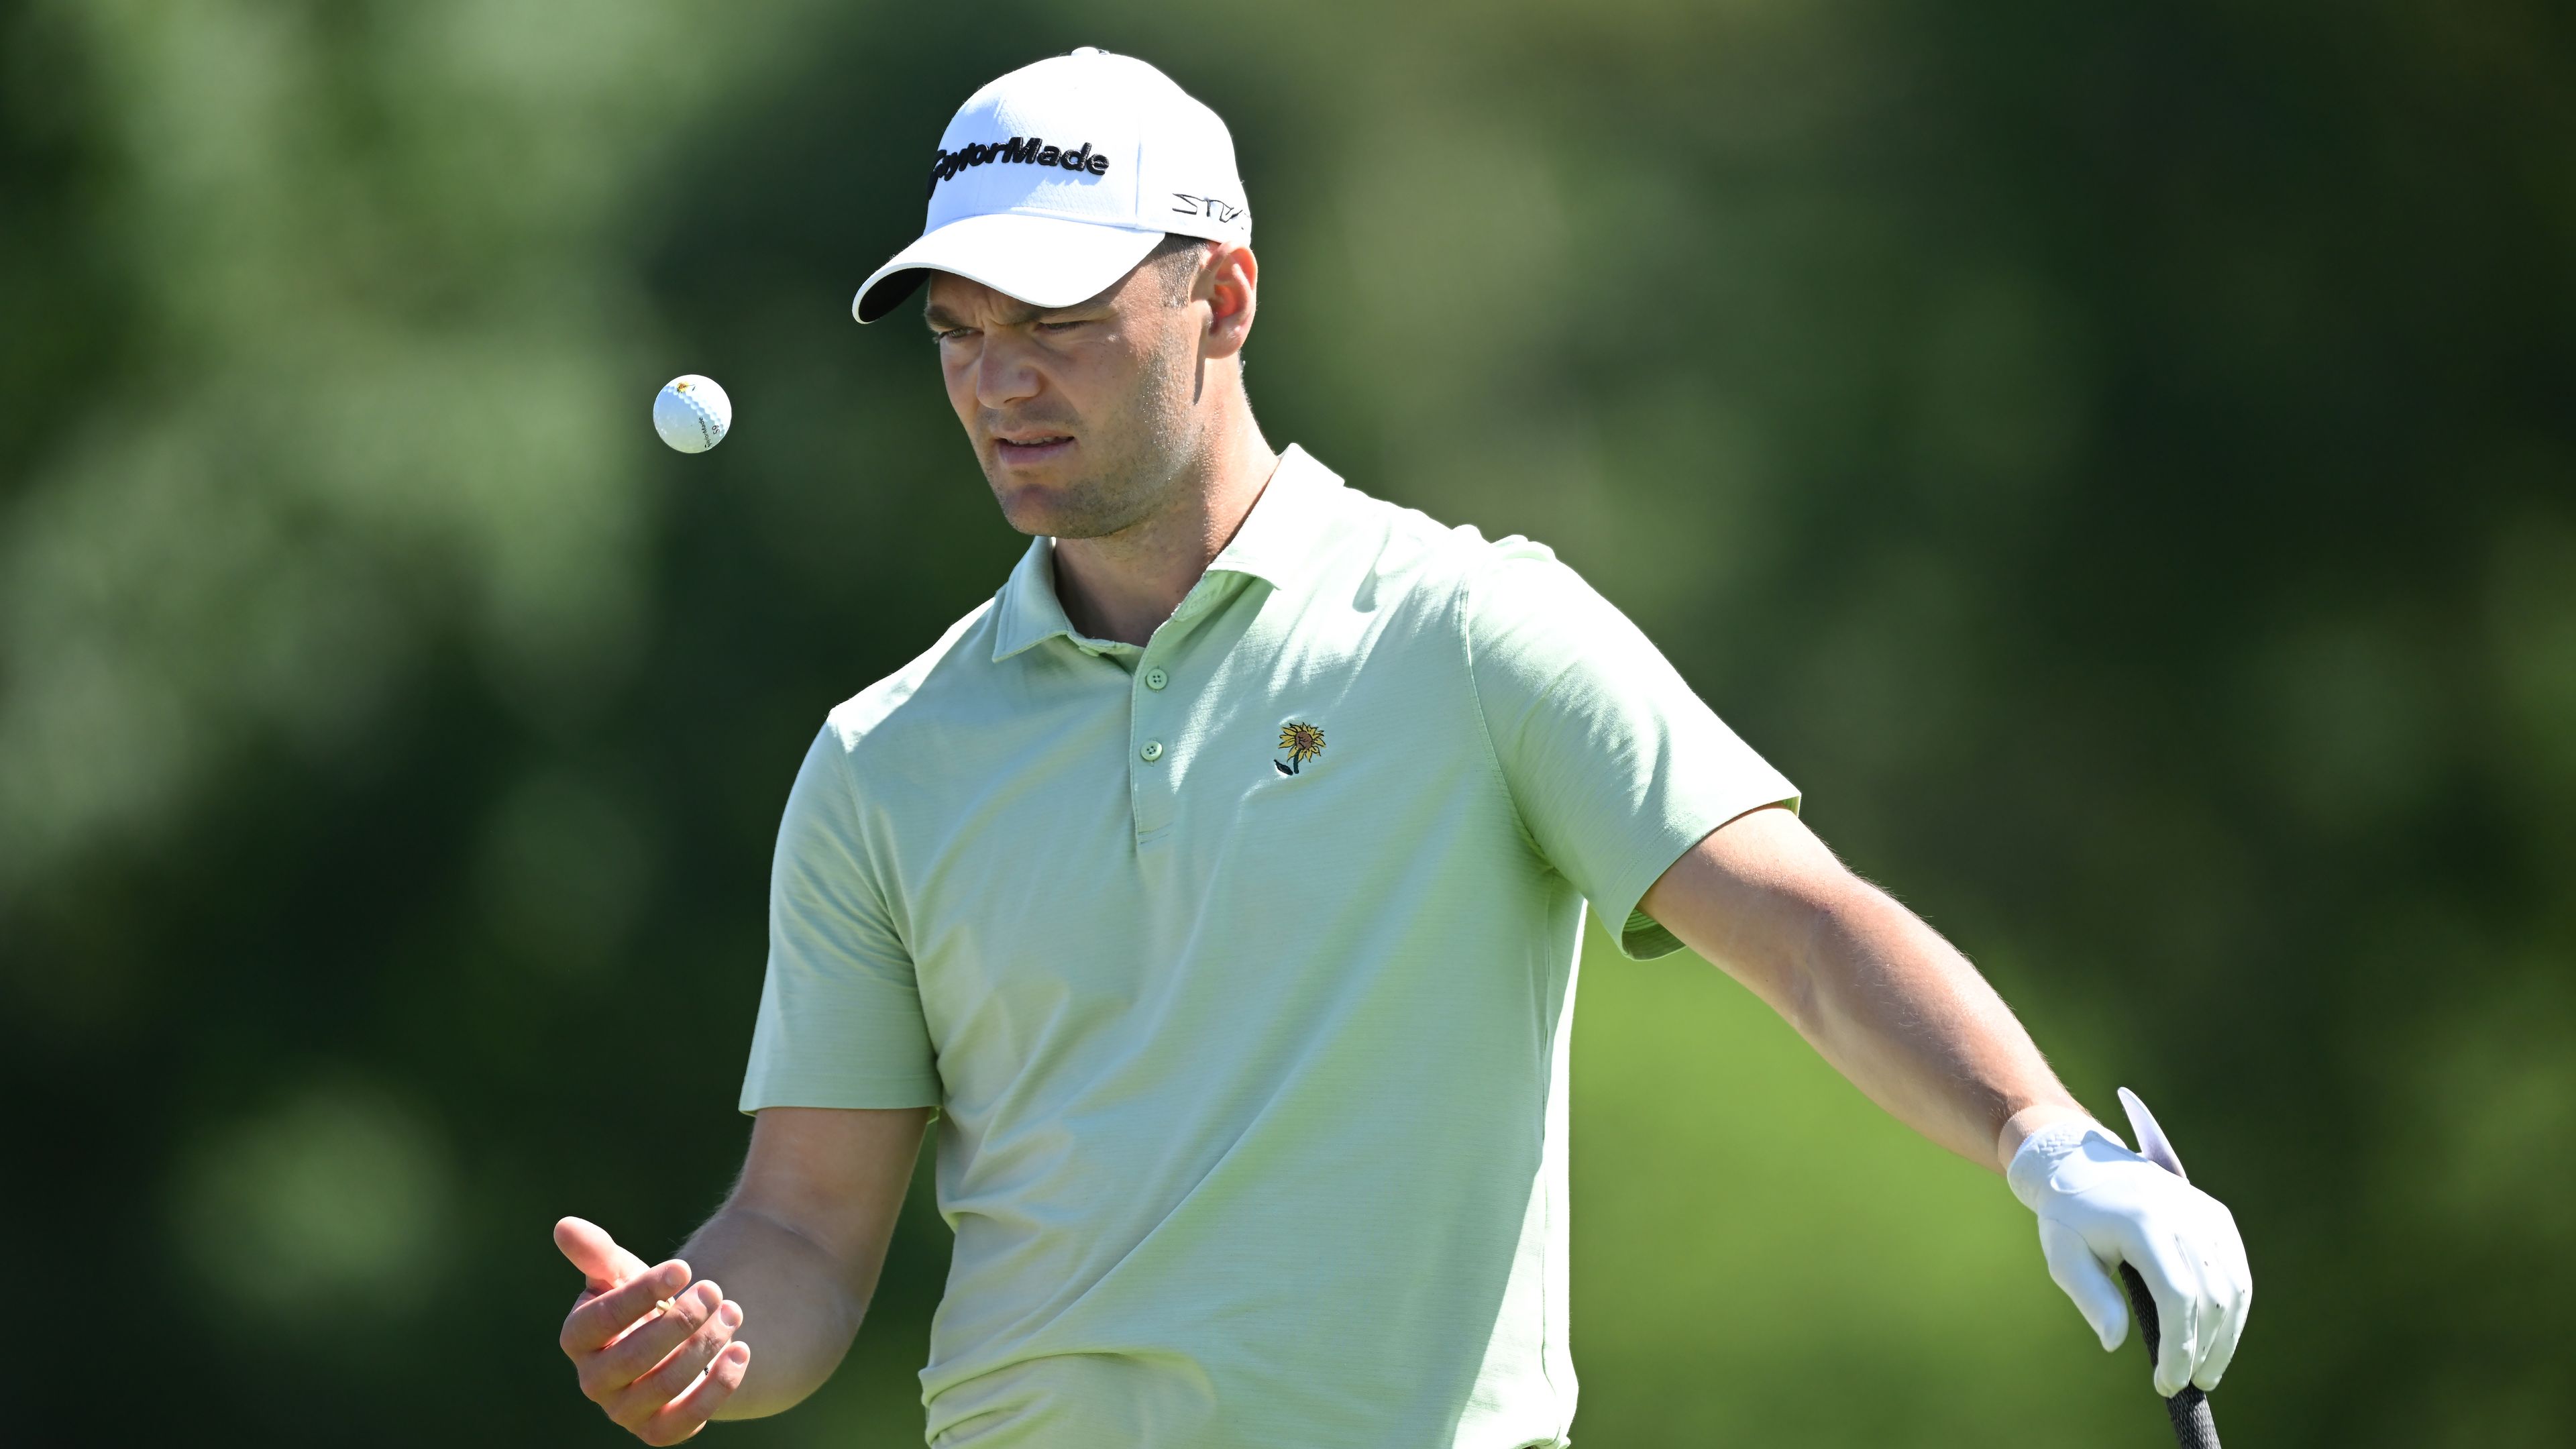 Martin Kaymer prepares to tee off on the 11th hole during the first round of the BMW International Open.